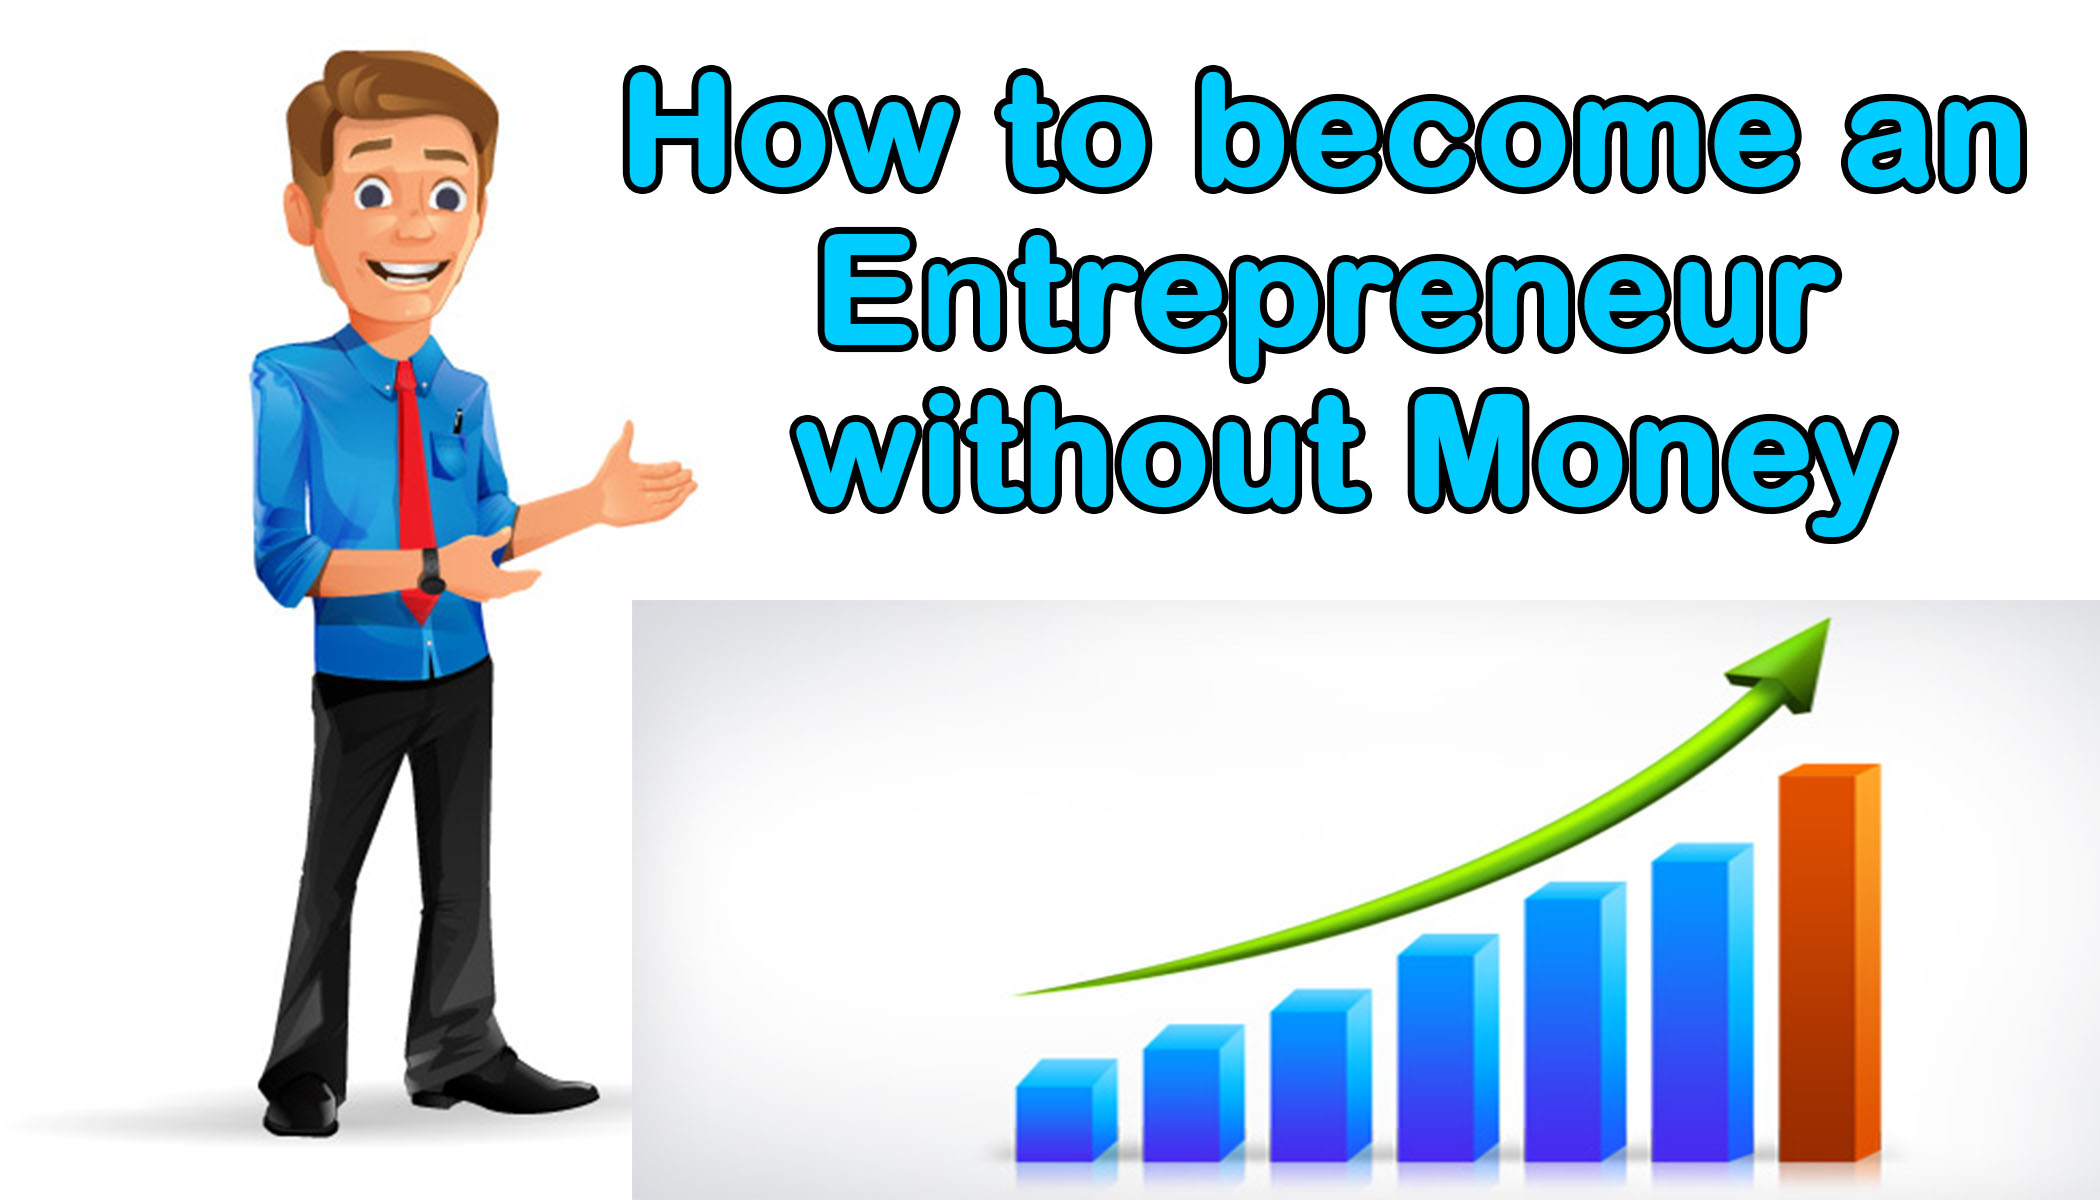 How to become an Entrepreneur without Money